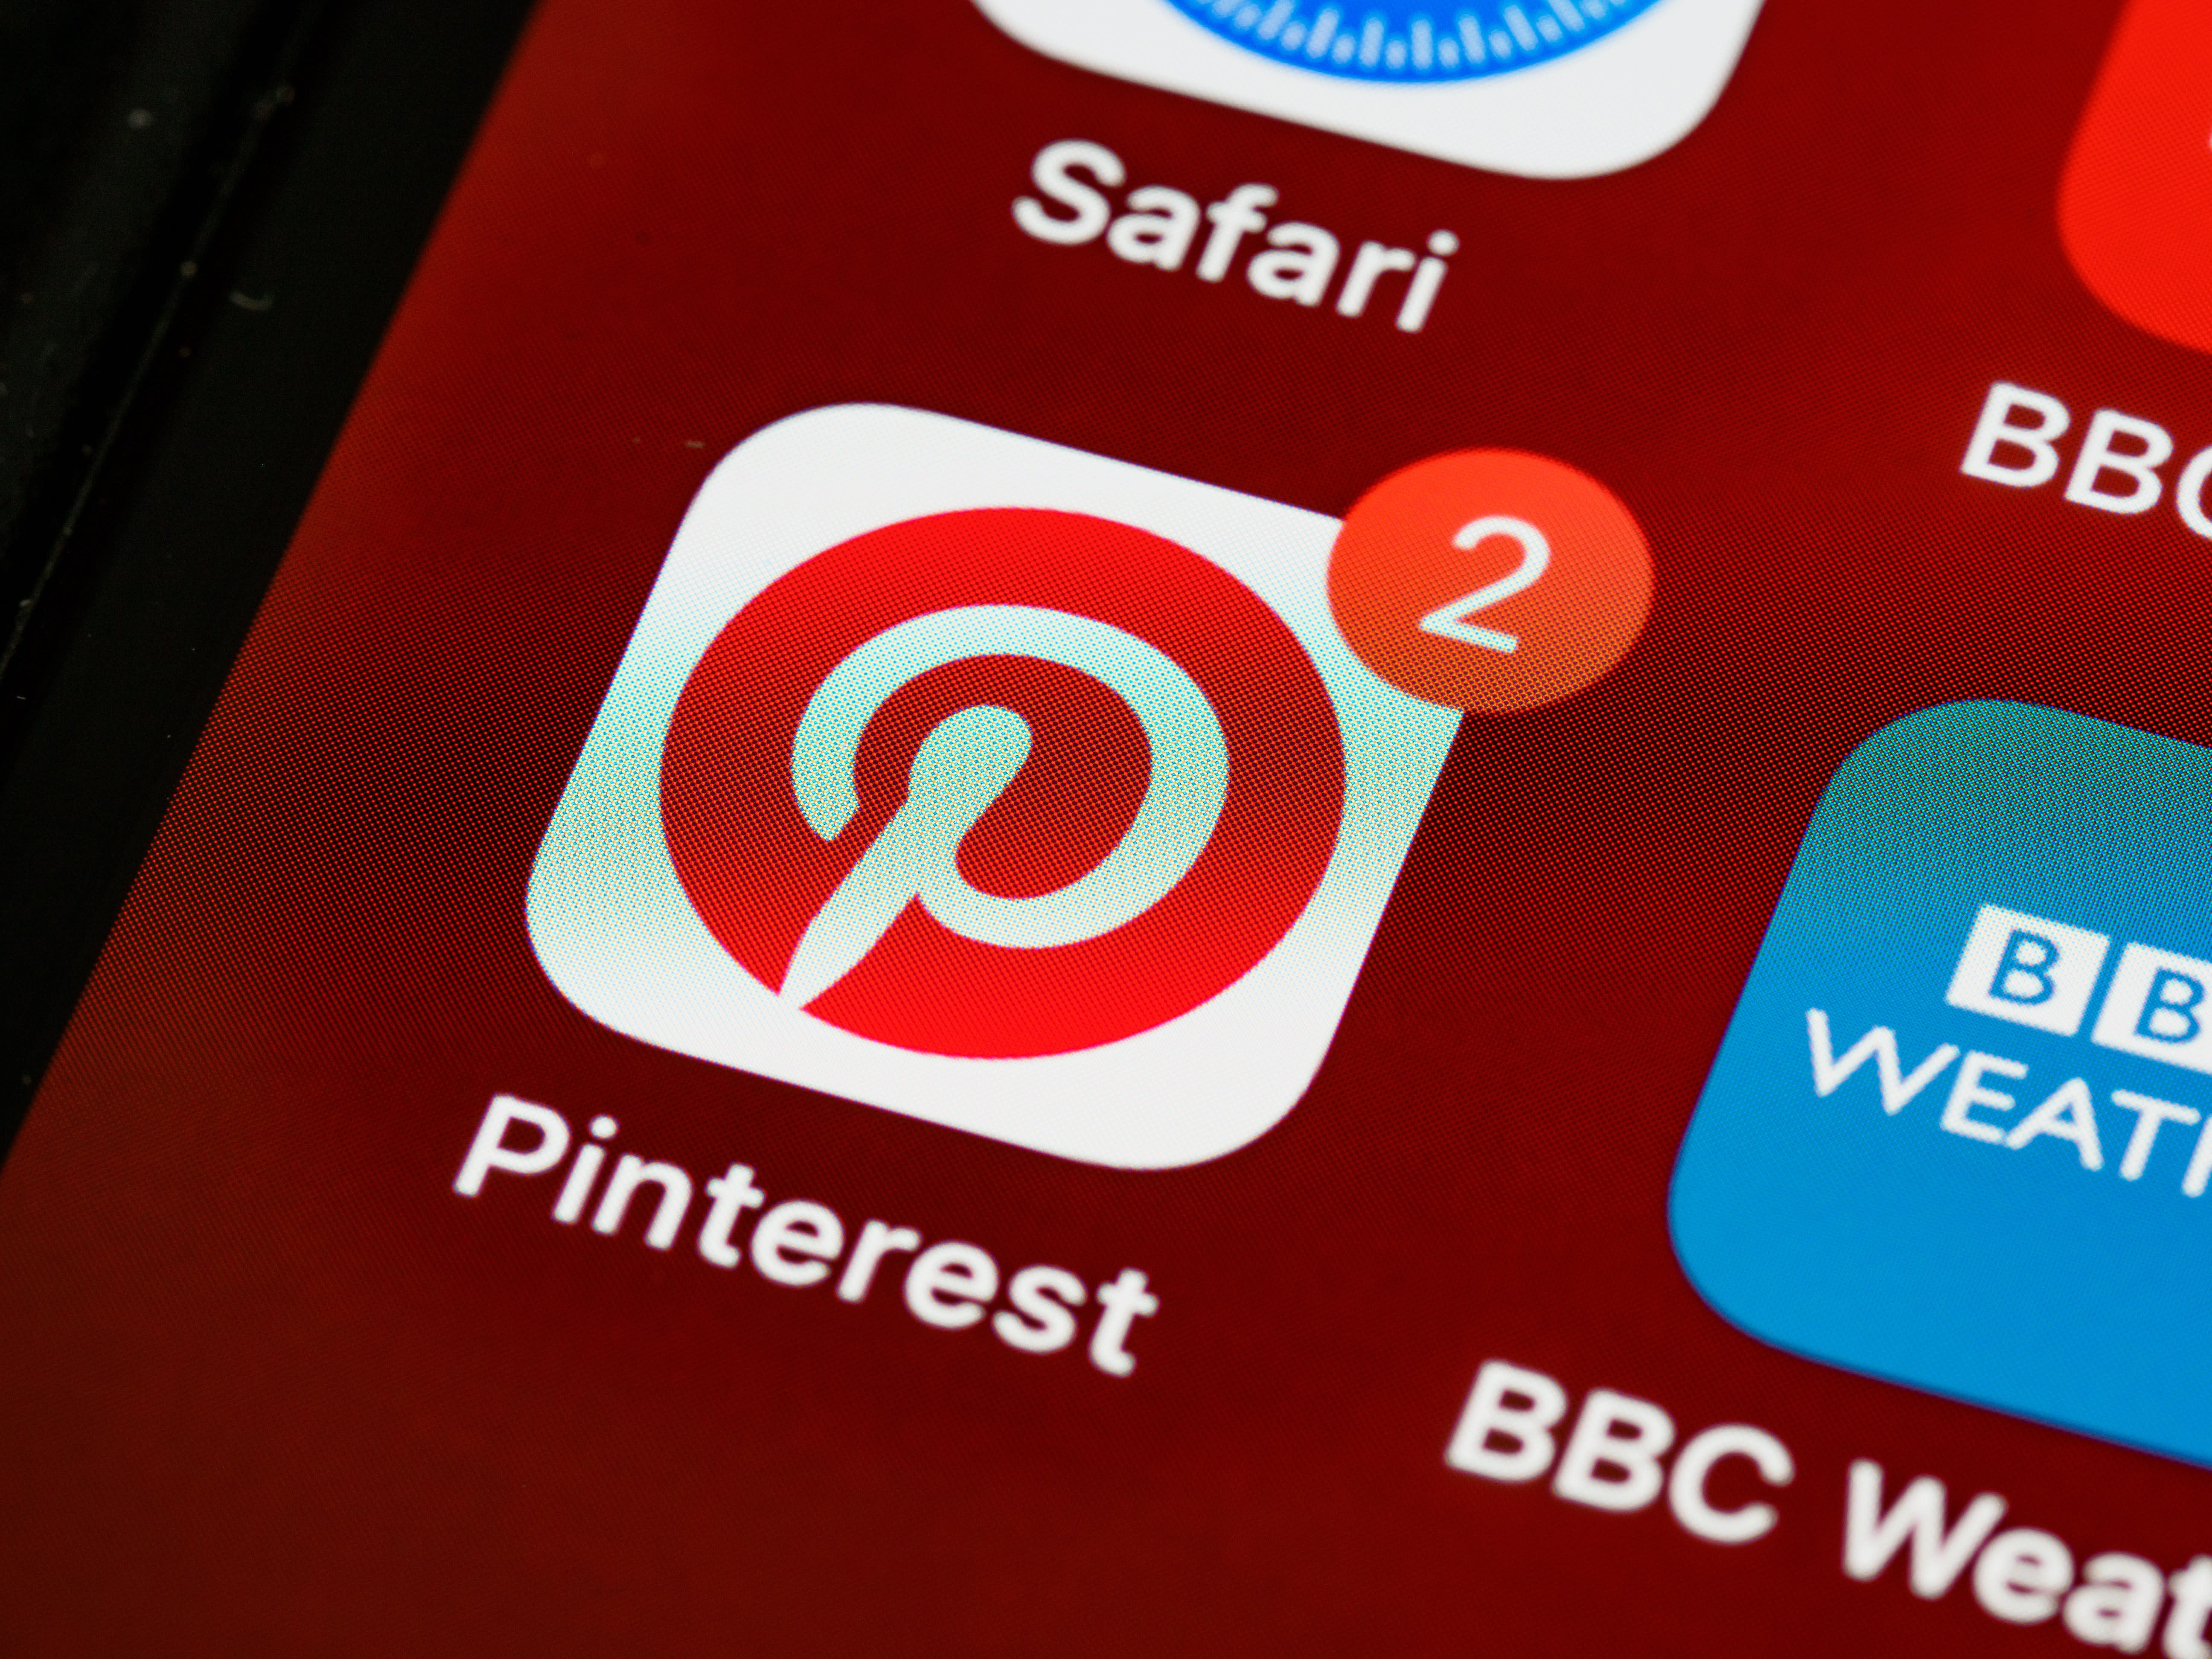 What is Pinterest marketing?